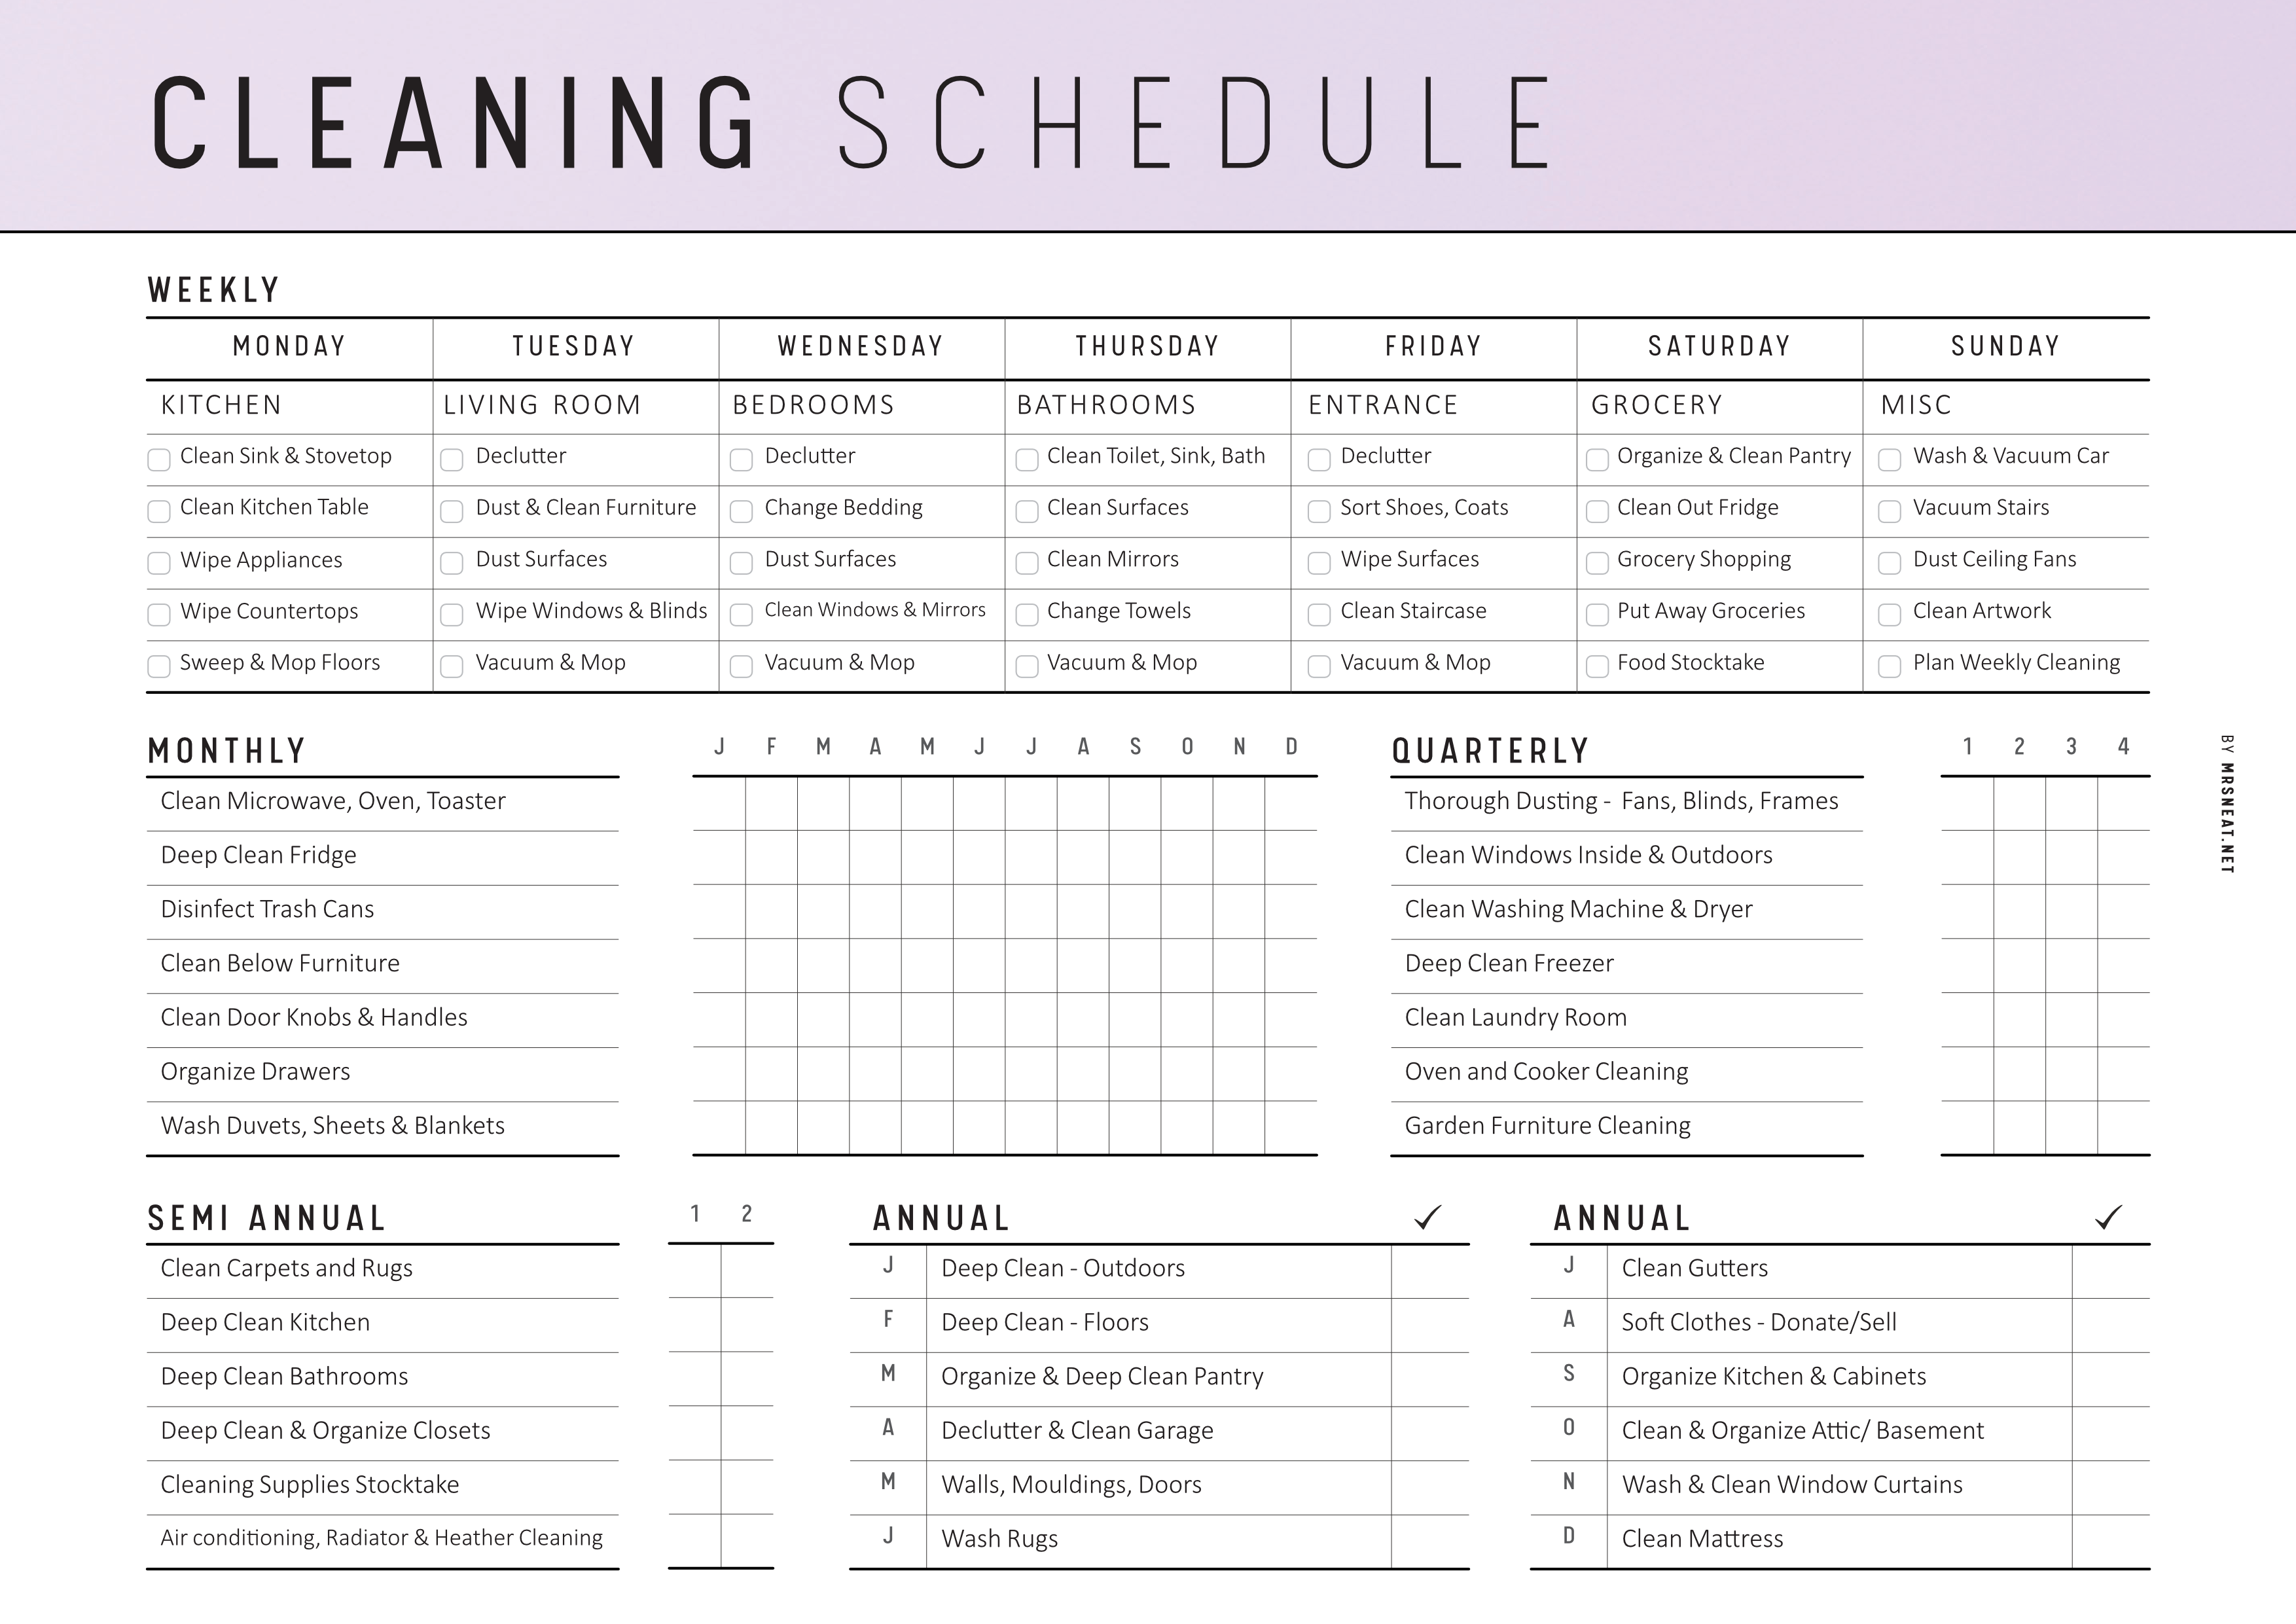 Cleaning Schedule Landscape Template - 2 Versions